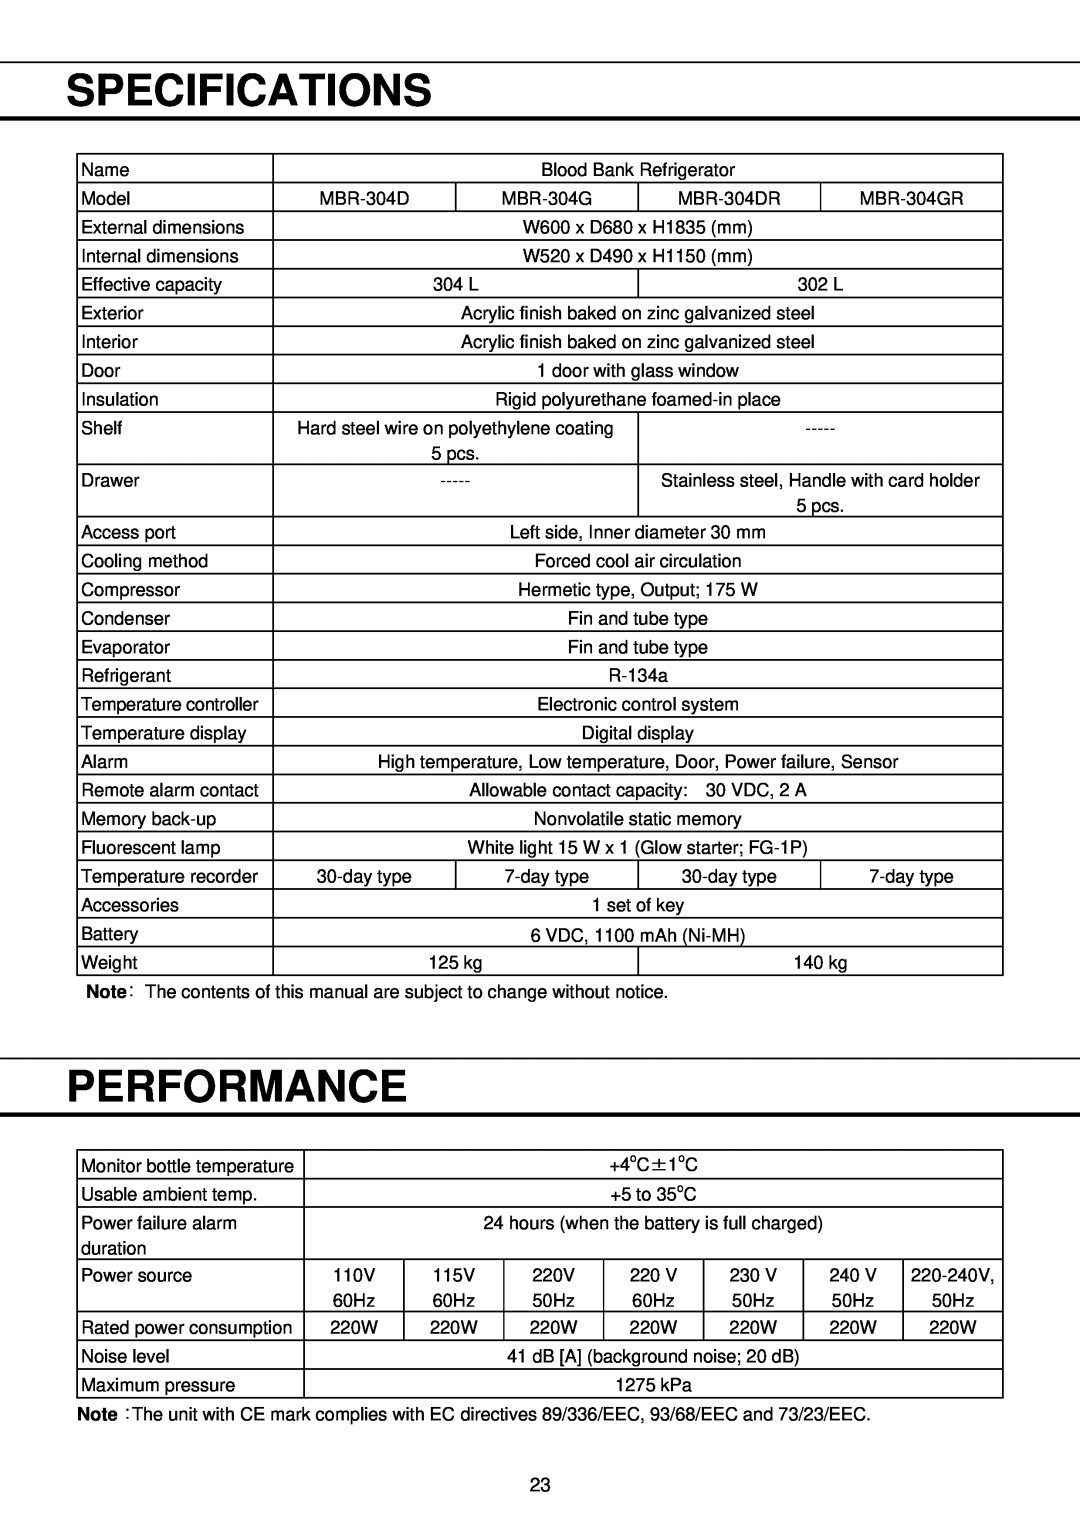 Sanyo MBR-304DR instruction manual Specifications, Performance 